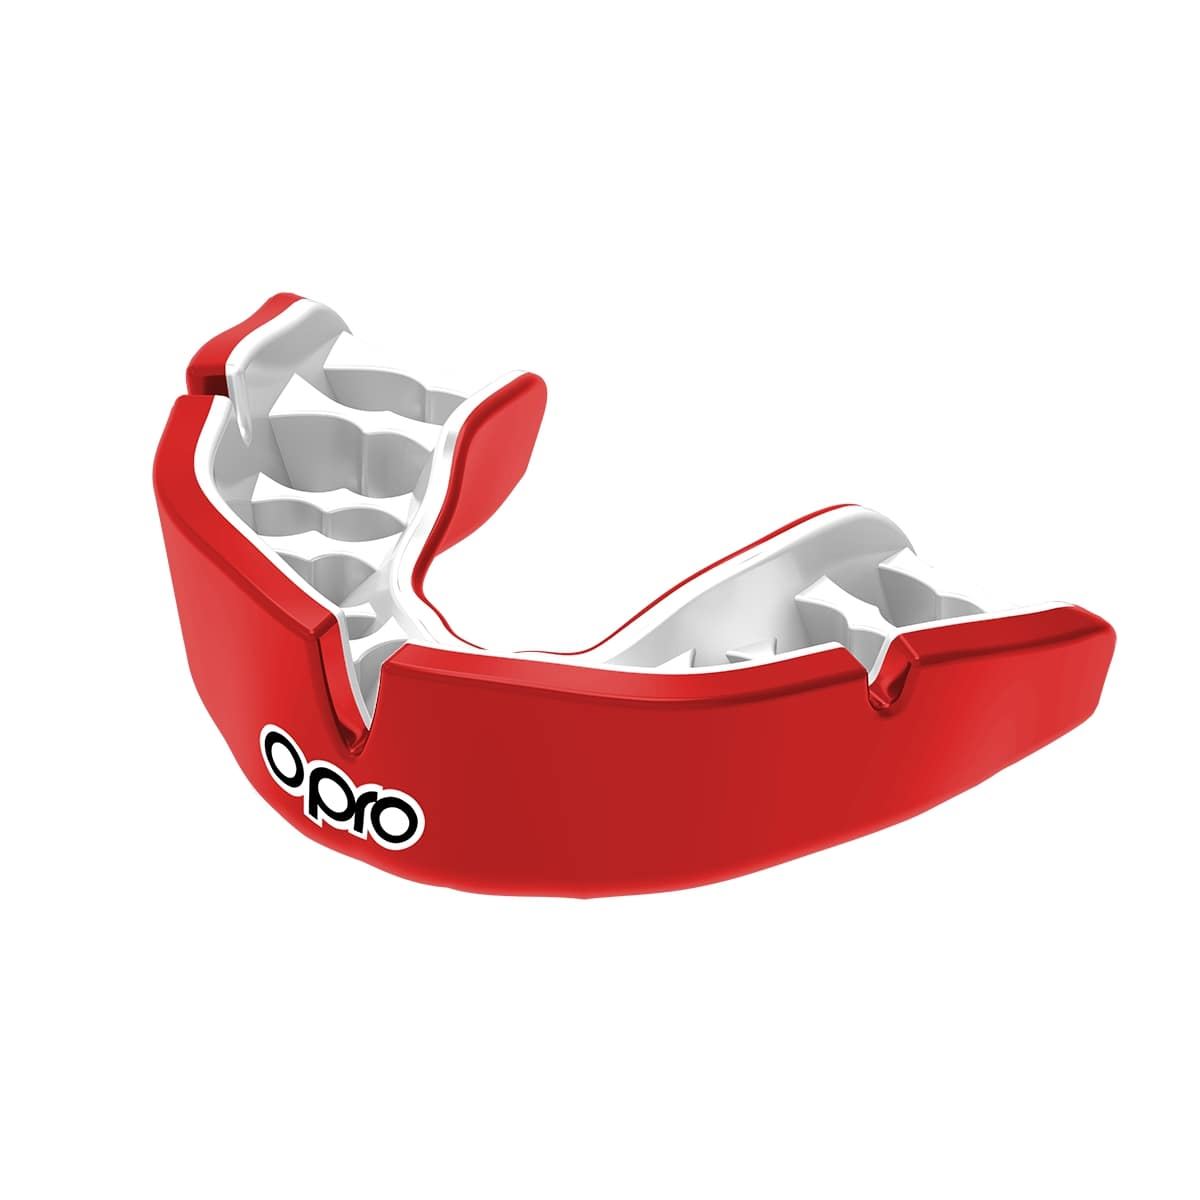 Men's Rugby Protective Mouthguard Opro Instant Custom Fit Adult 2022 Red/White